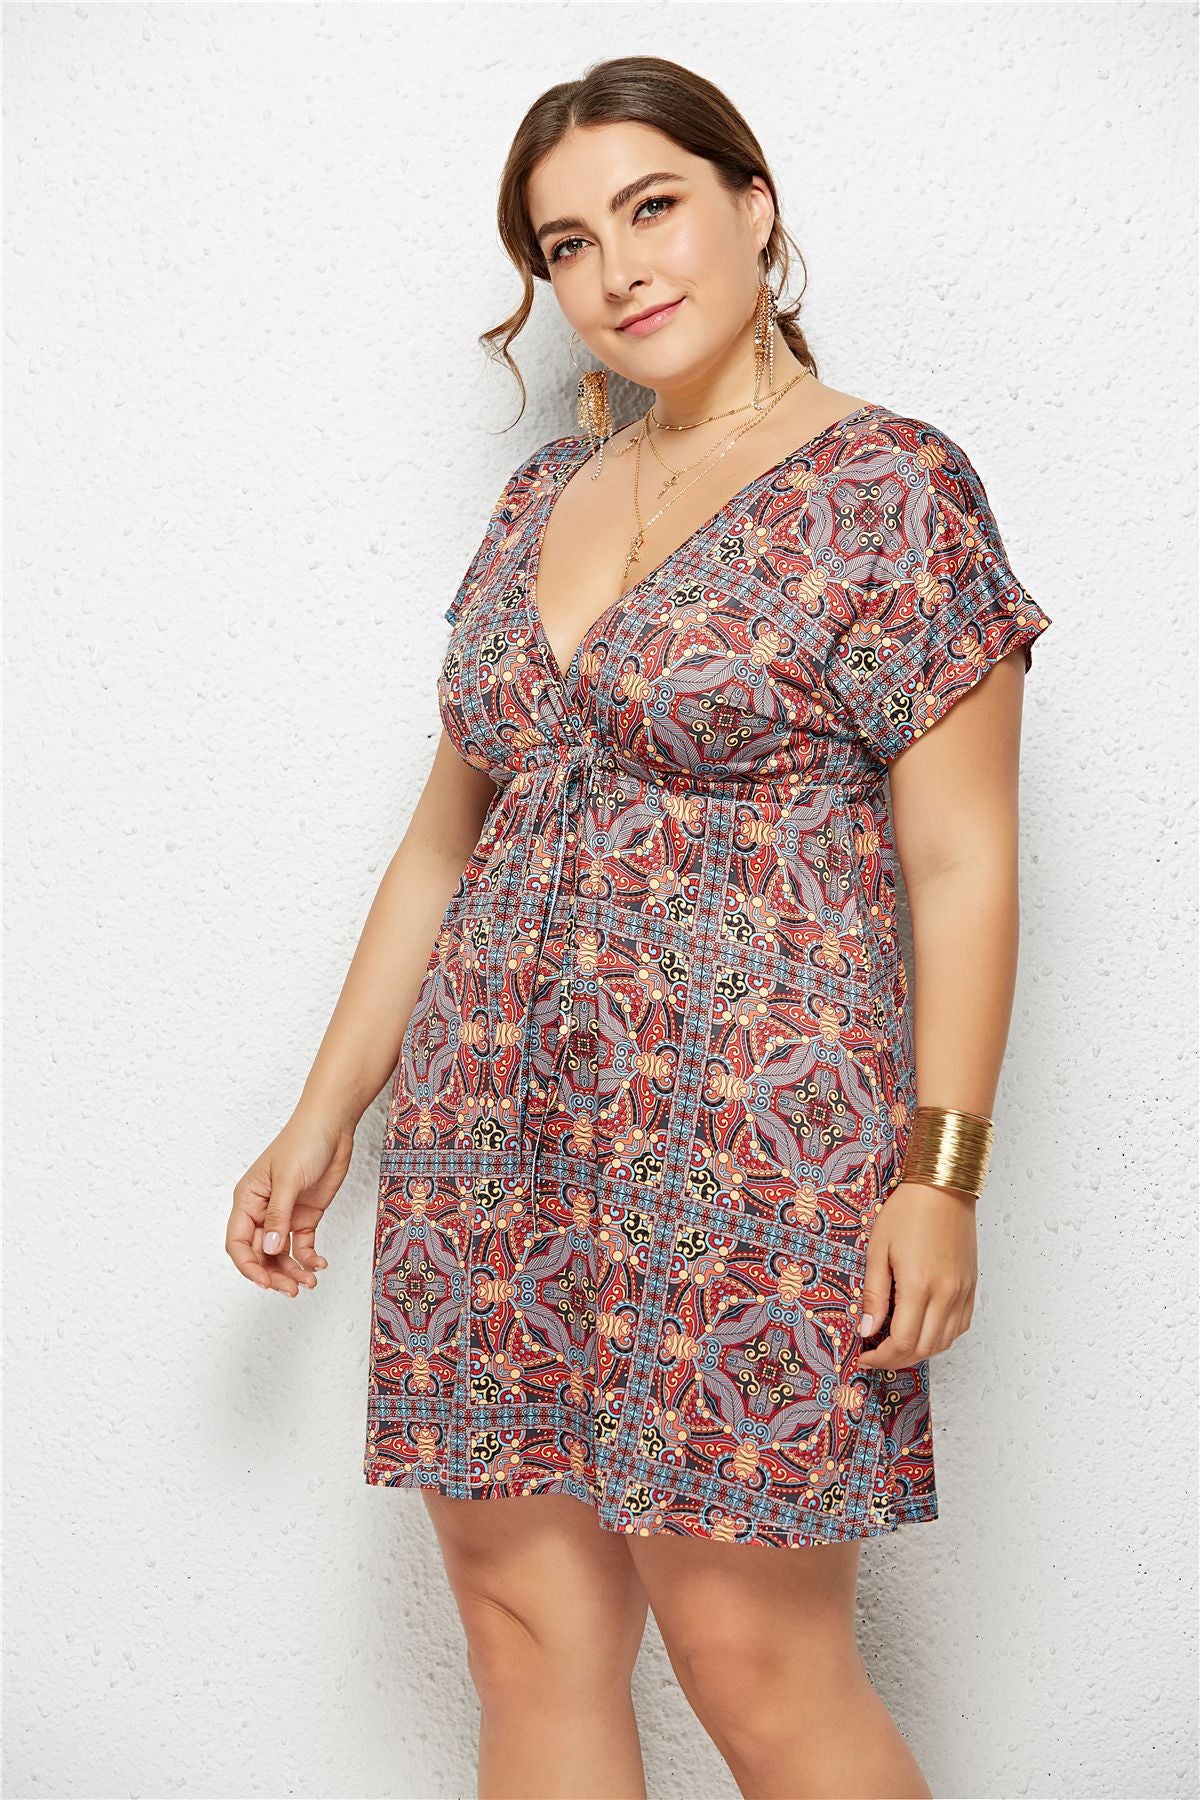 Plus Size Plus Size Sexy Deep V-neck Elastic Waist Printed Dress Holiday Home Wear  Women Clothing